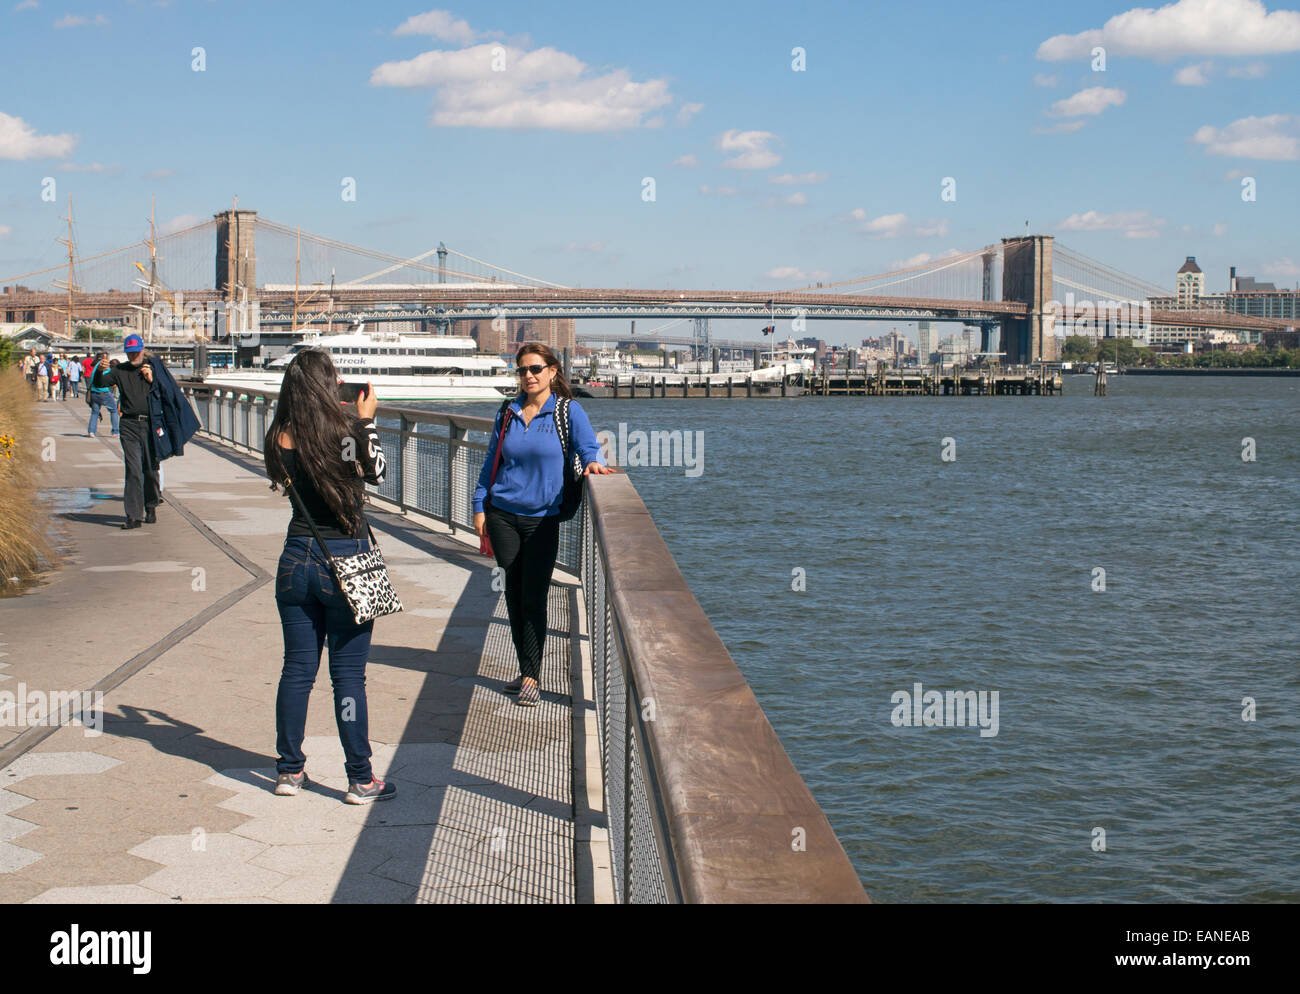 Young woman photographing friend with Brooklyn Bridge in the background Manhattan, New York, USA Stock Photo